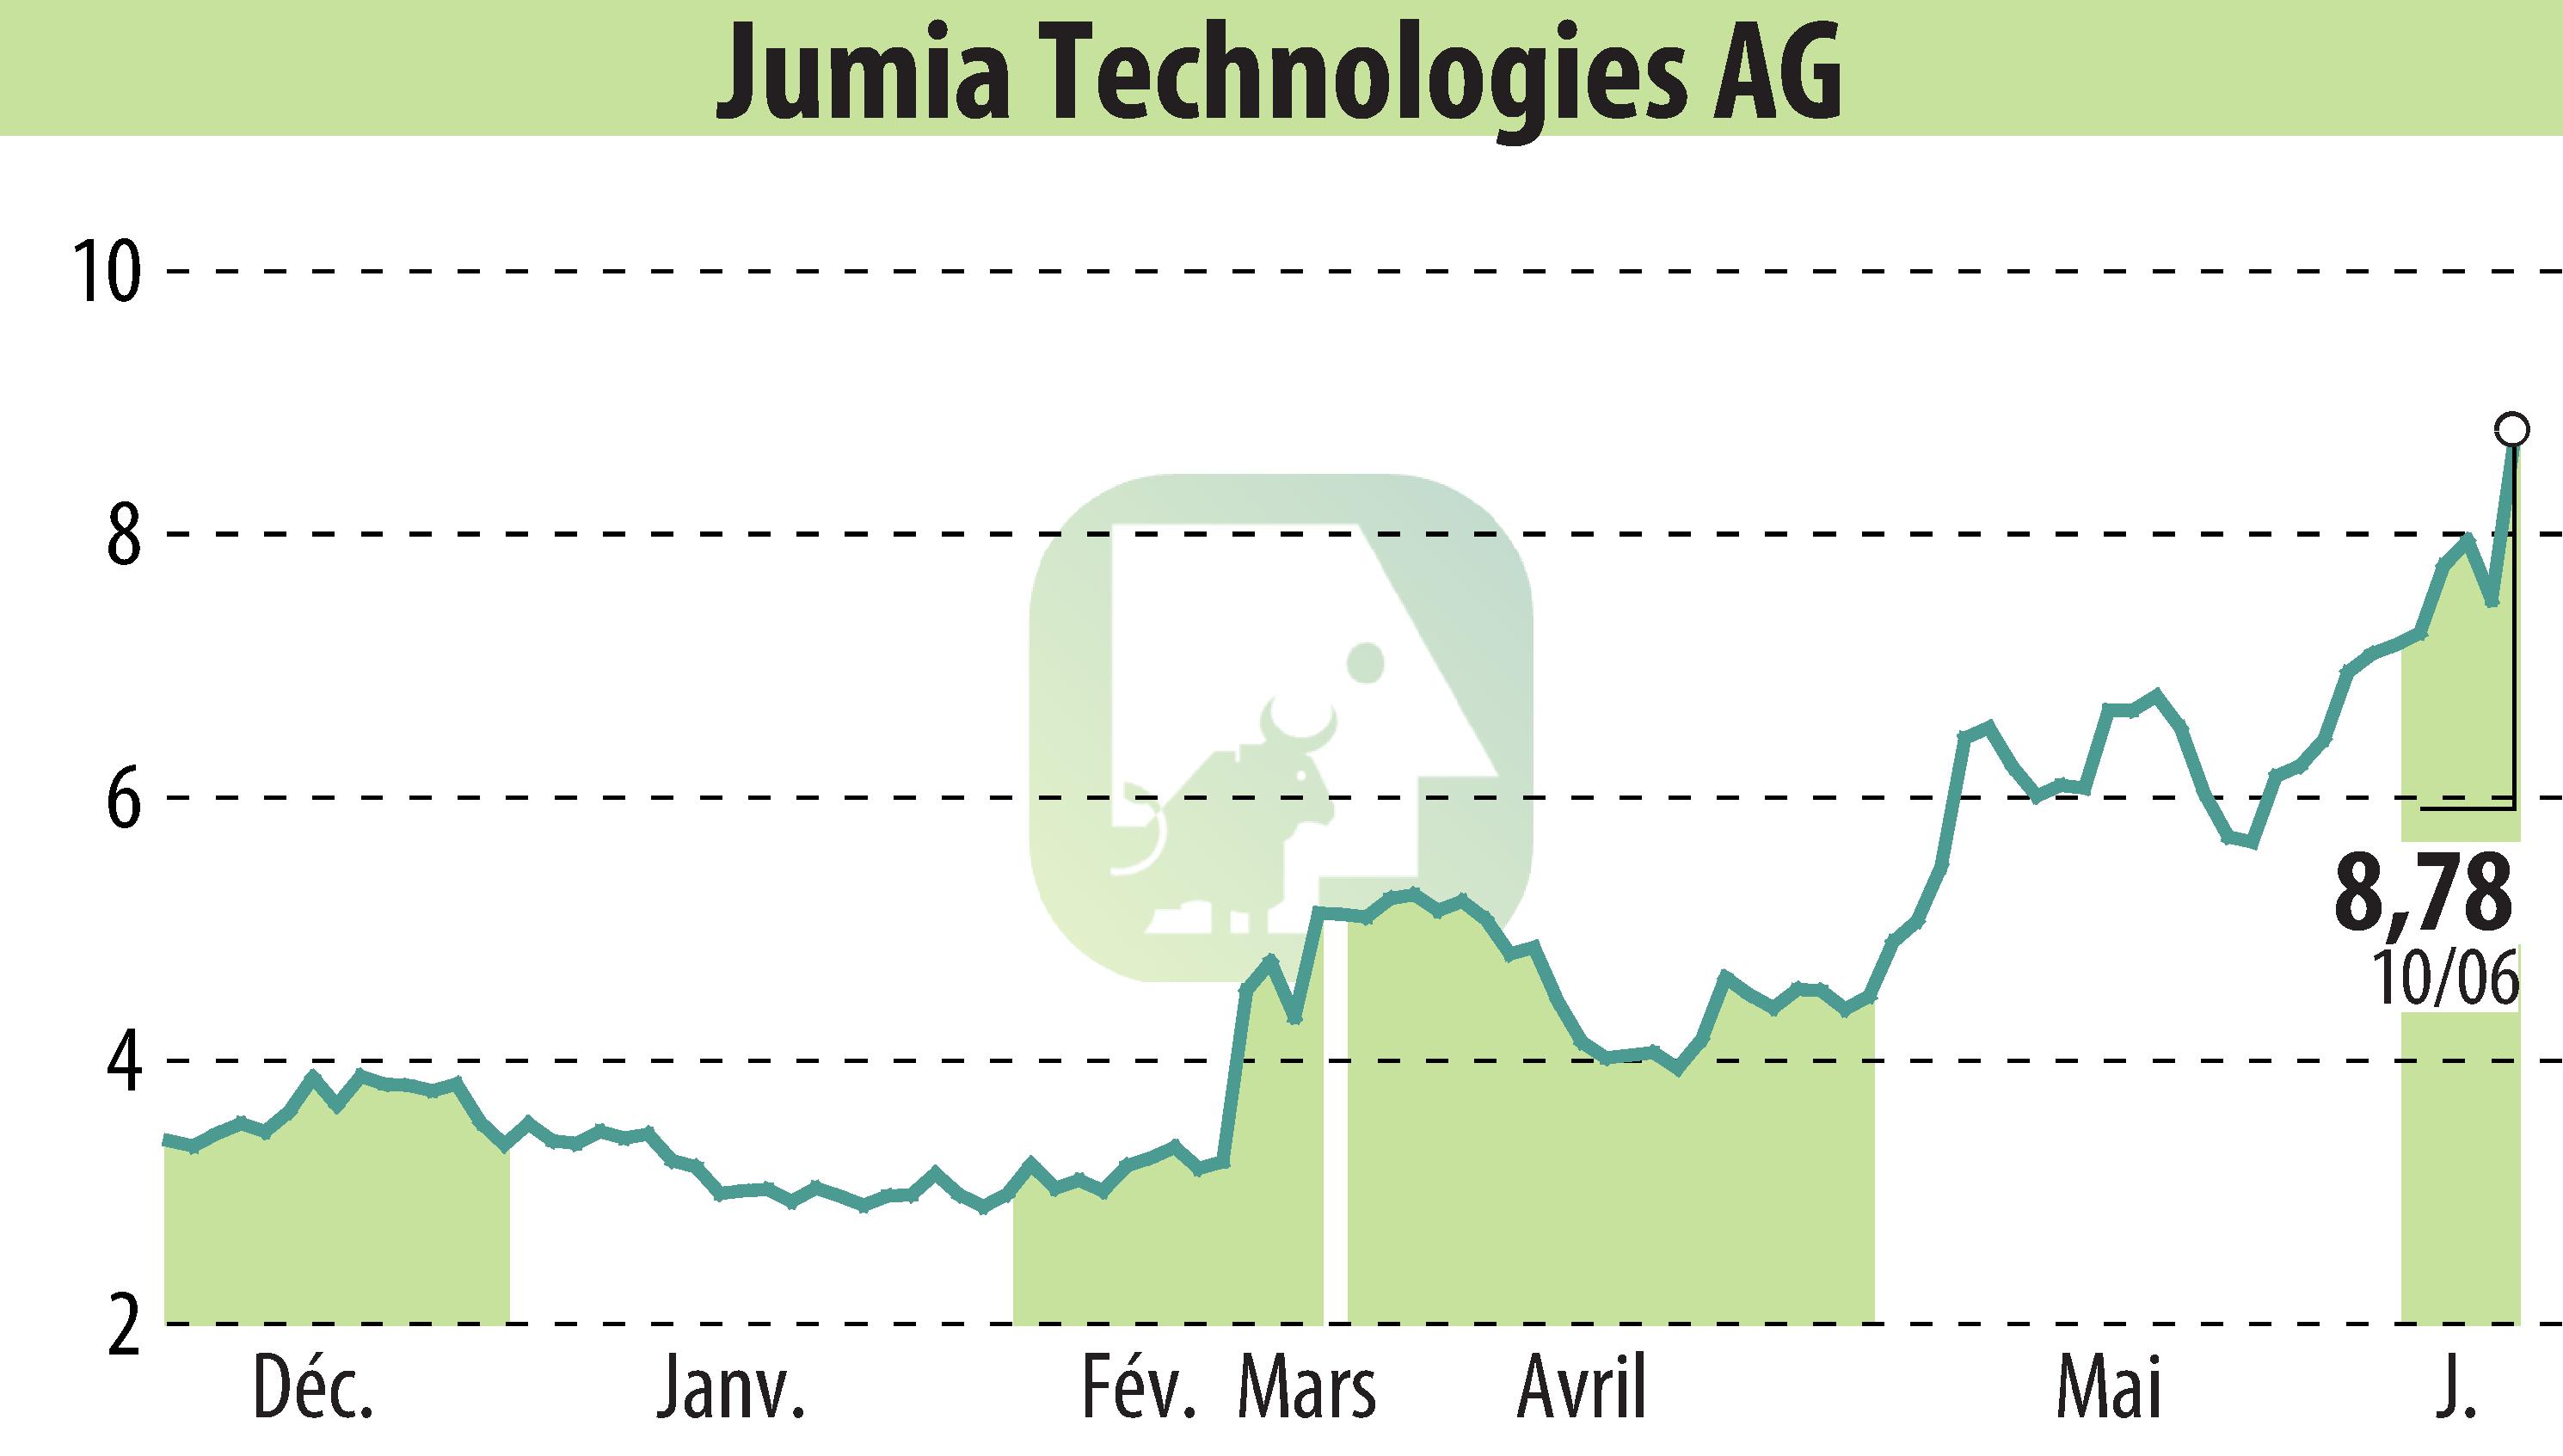 Stock price chart of Jumia Technologies AG (EBR:JMIA) showing fluctuations.